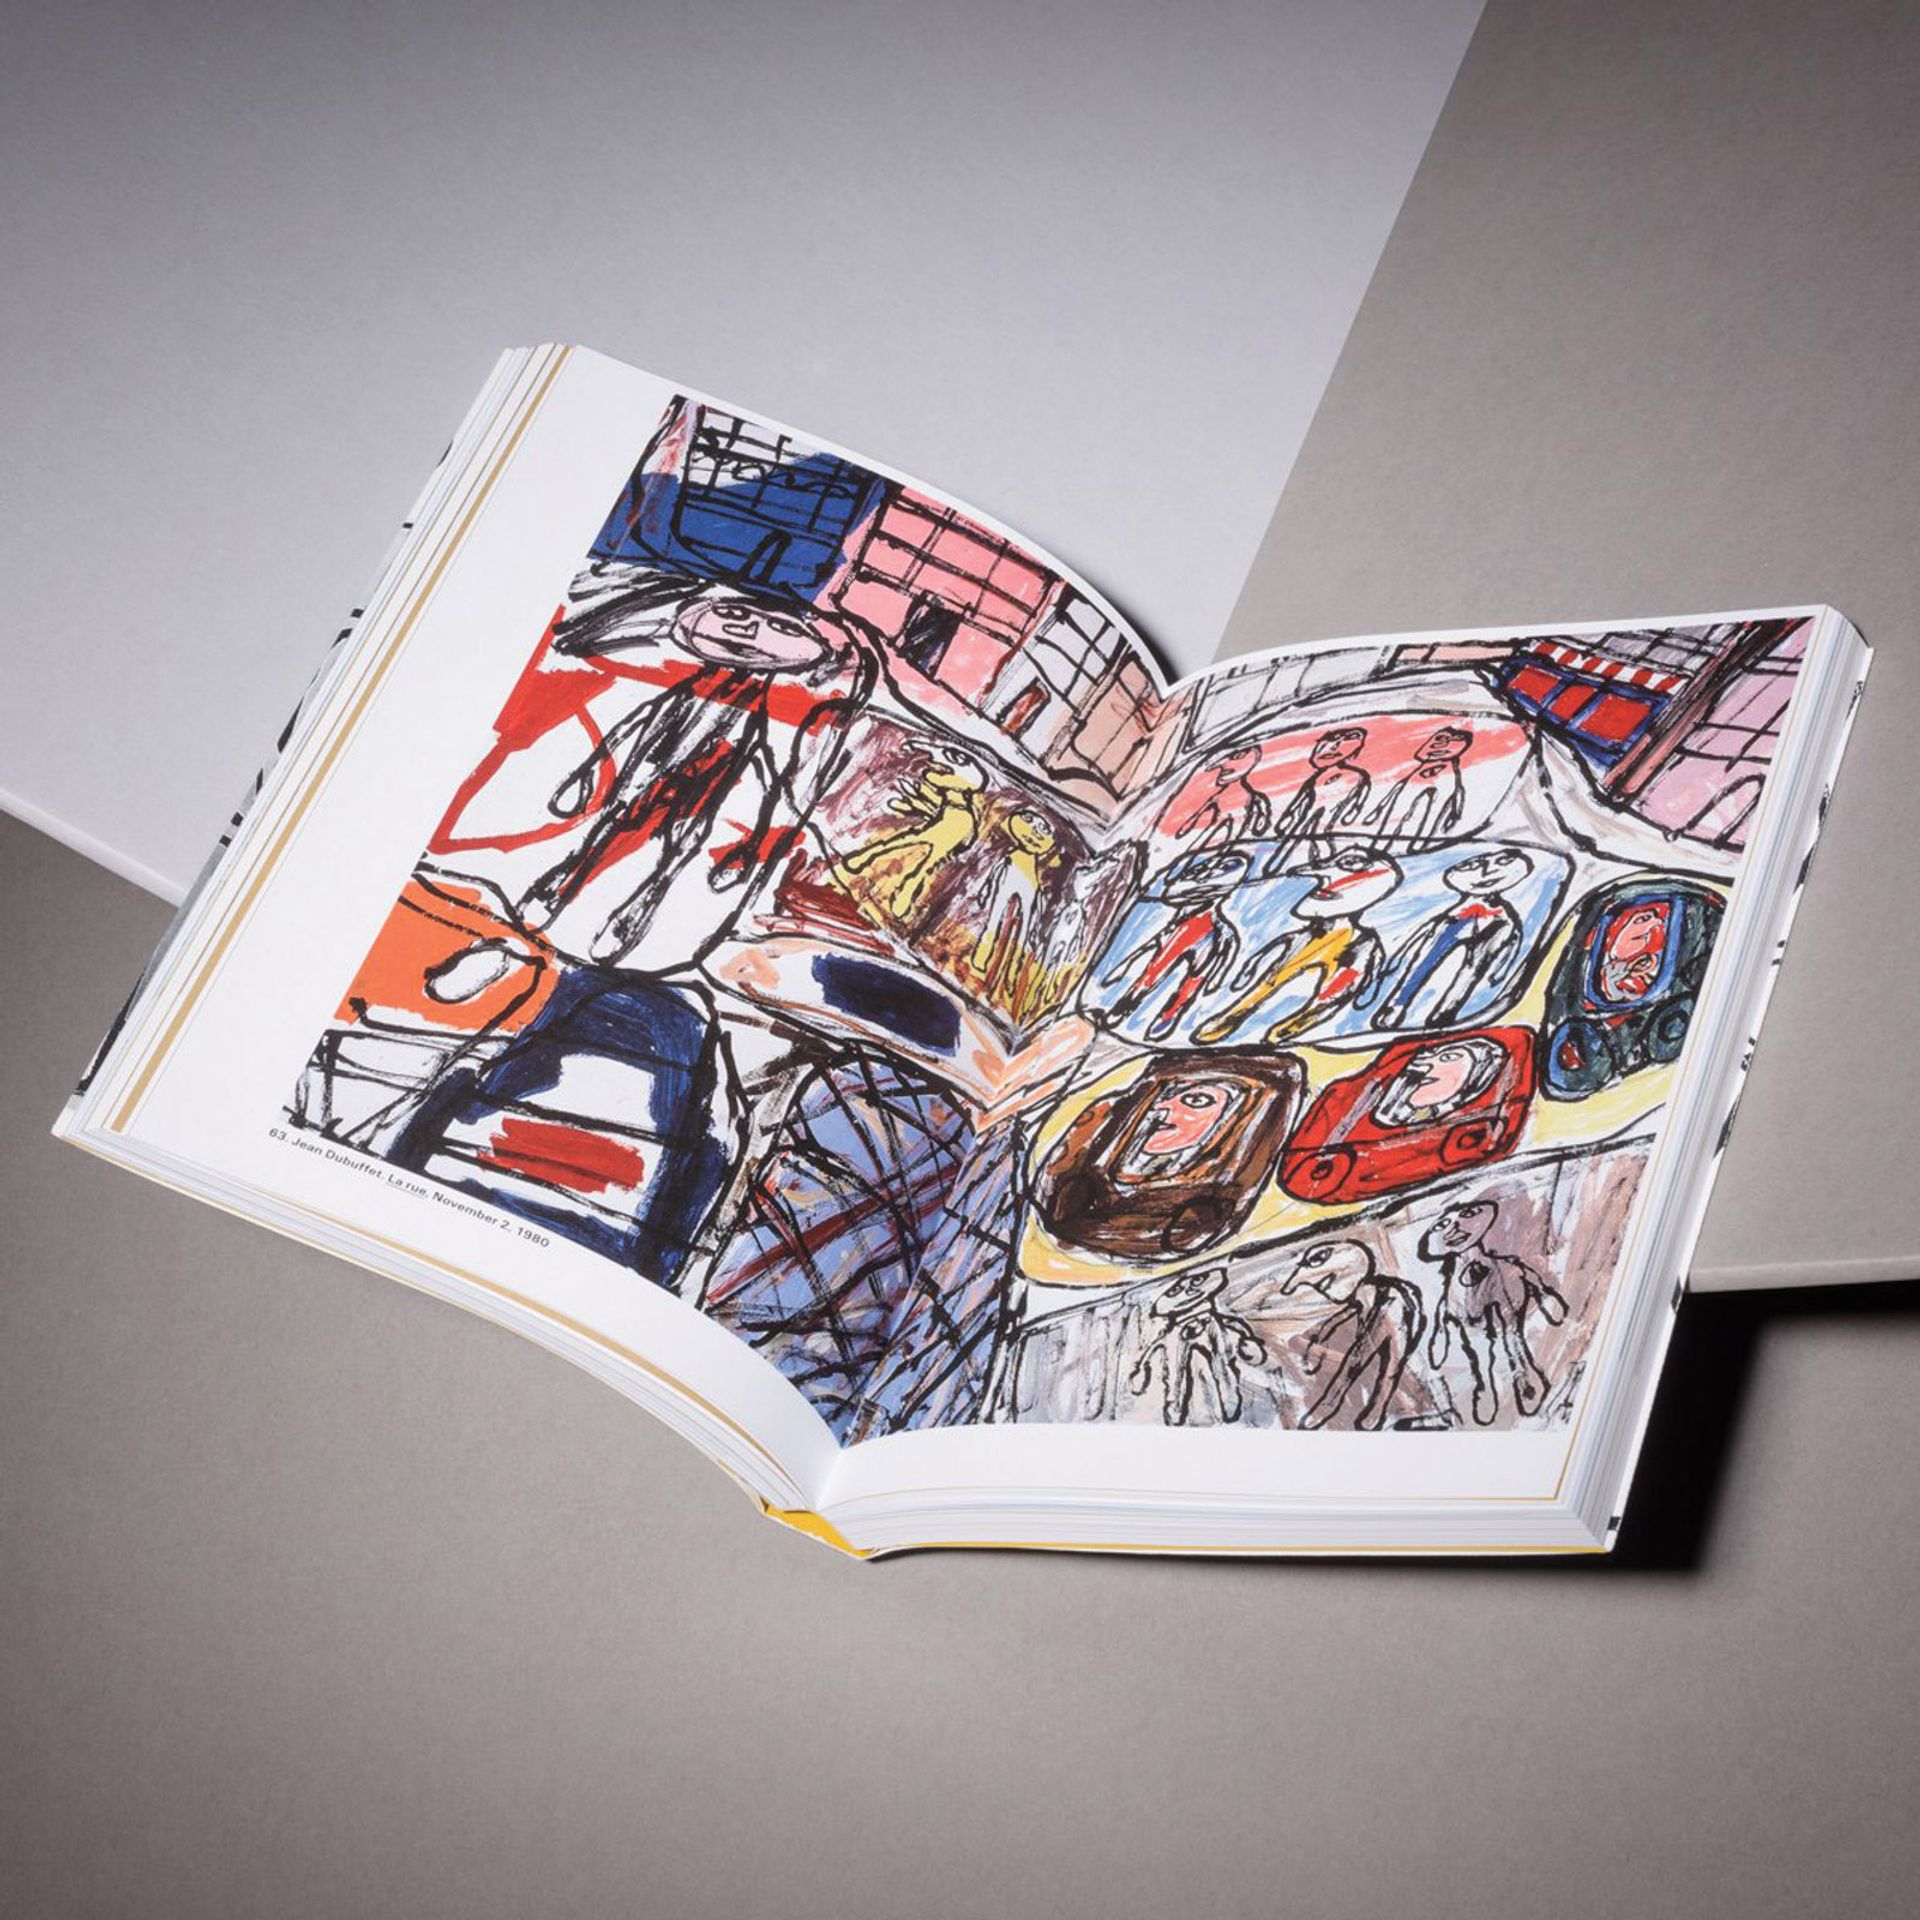 Double first: Dubuffet and the City 2019 winner in two categories Hauser & Wirth